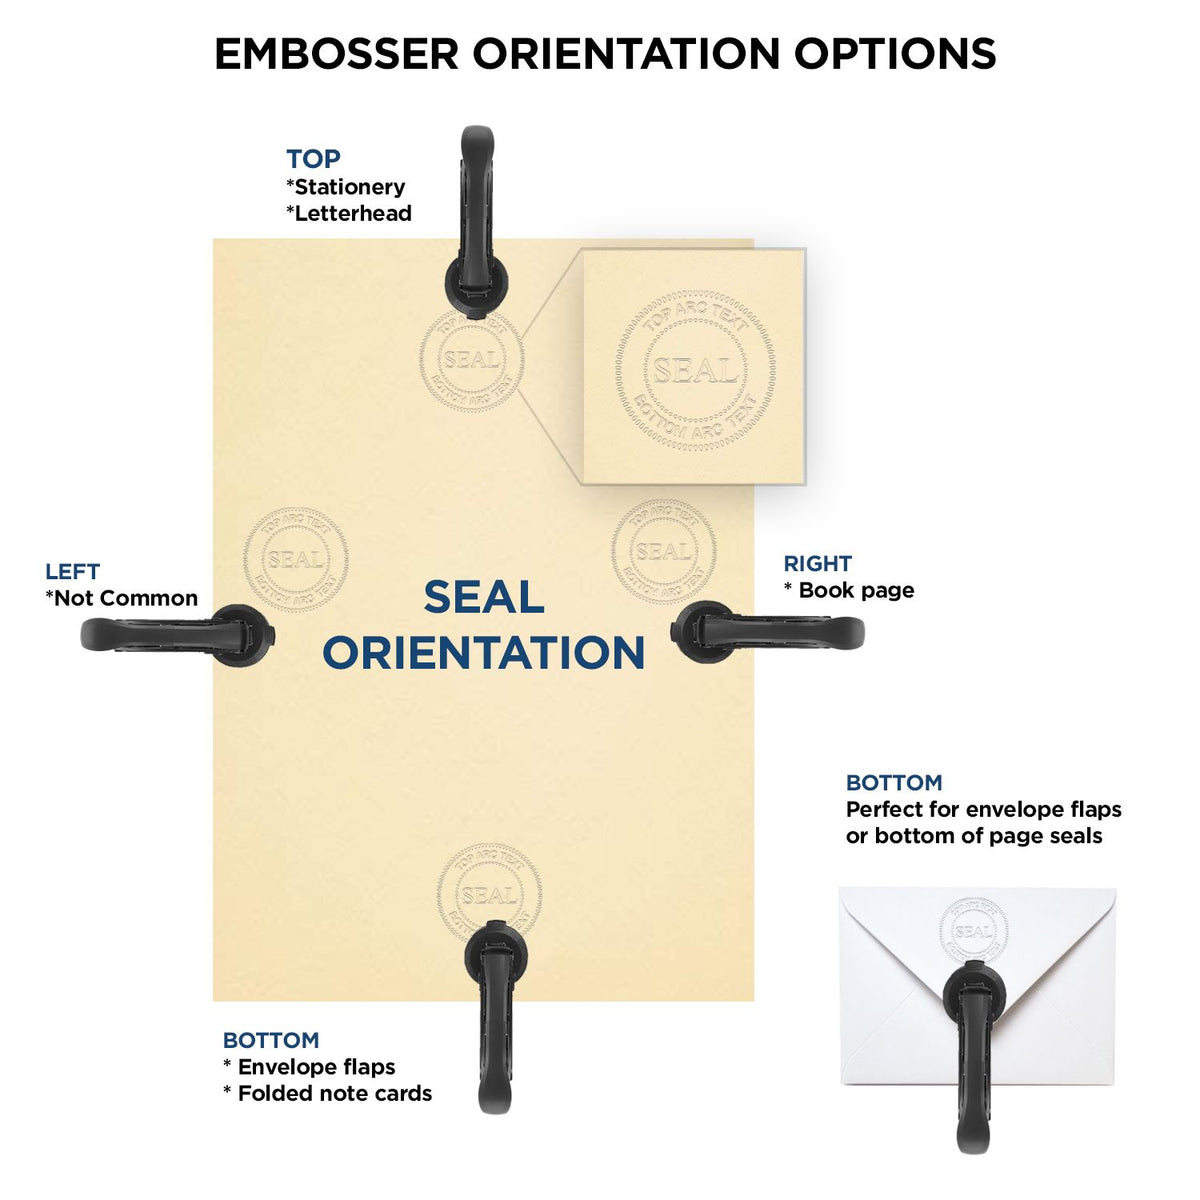 An infographic for the Hybrid West Virginia Engineer Seal showing embosser orientation, this is showing examples of a top, bottom, right and left insert.